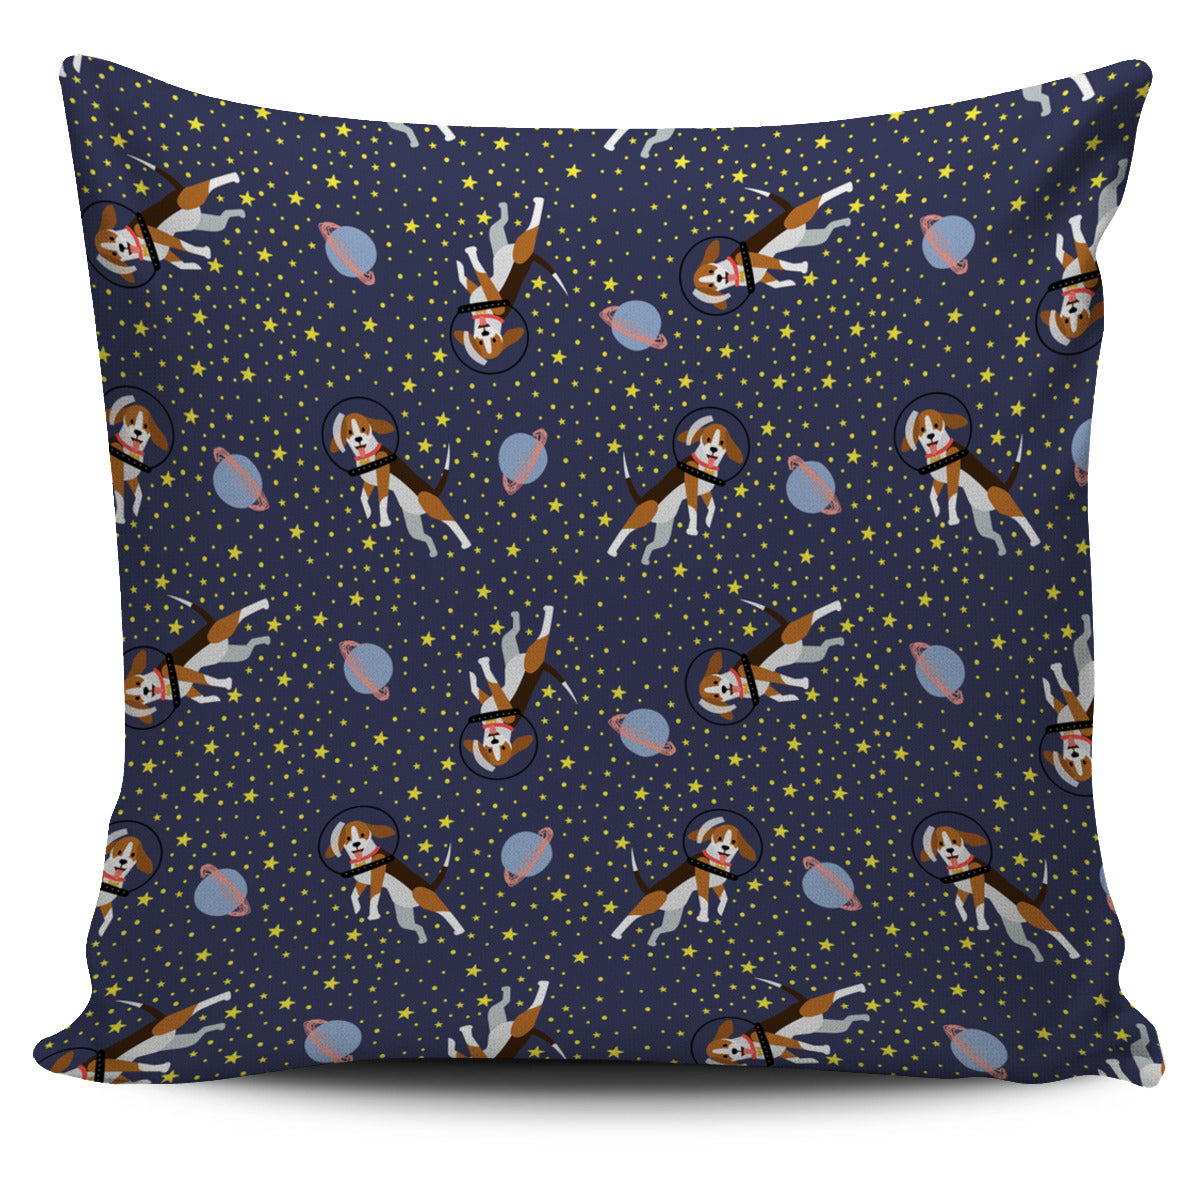 Space Beagle Pillow Cover